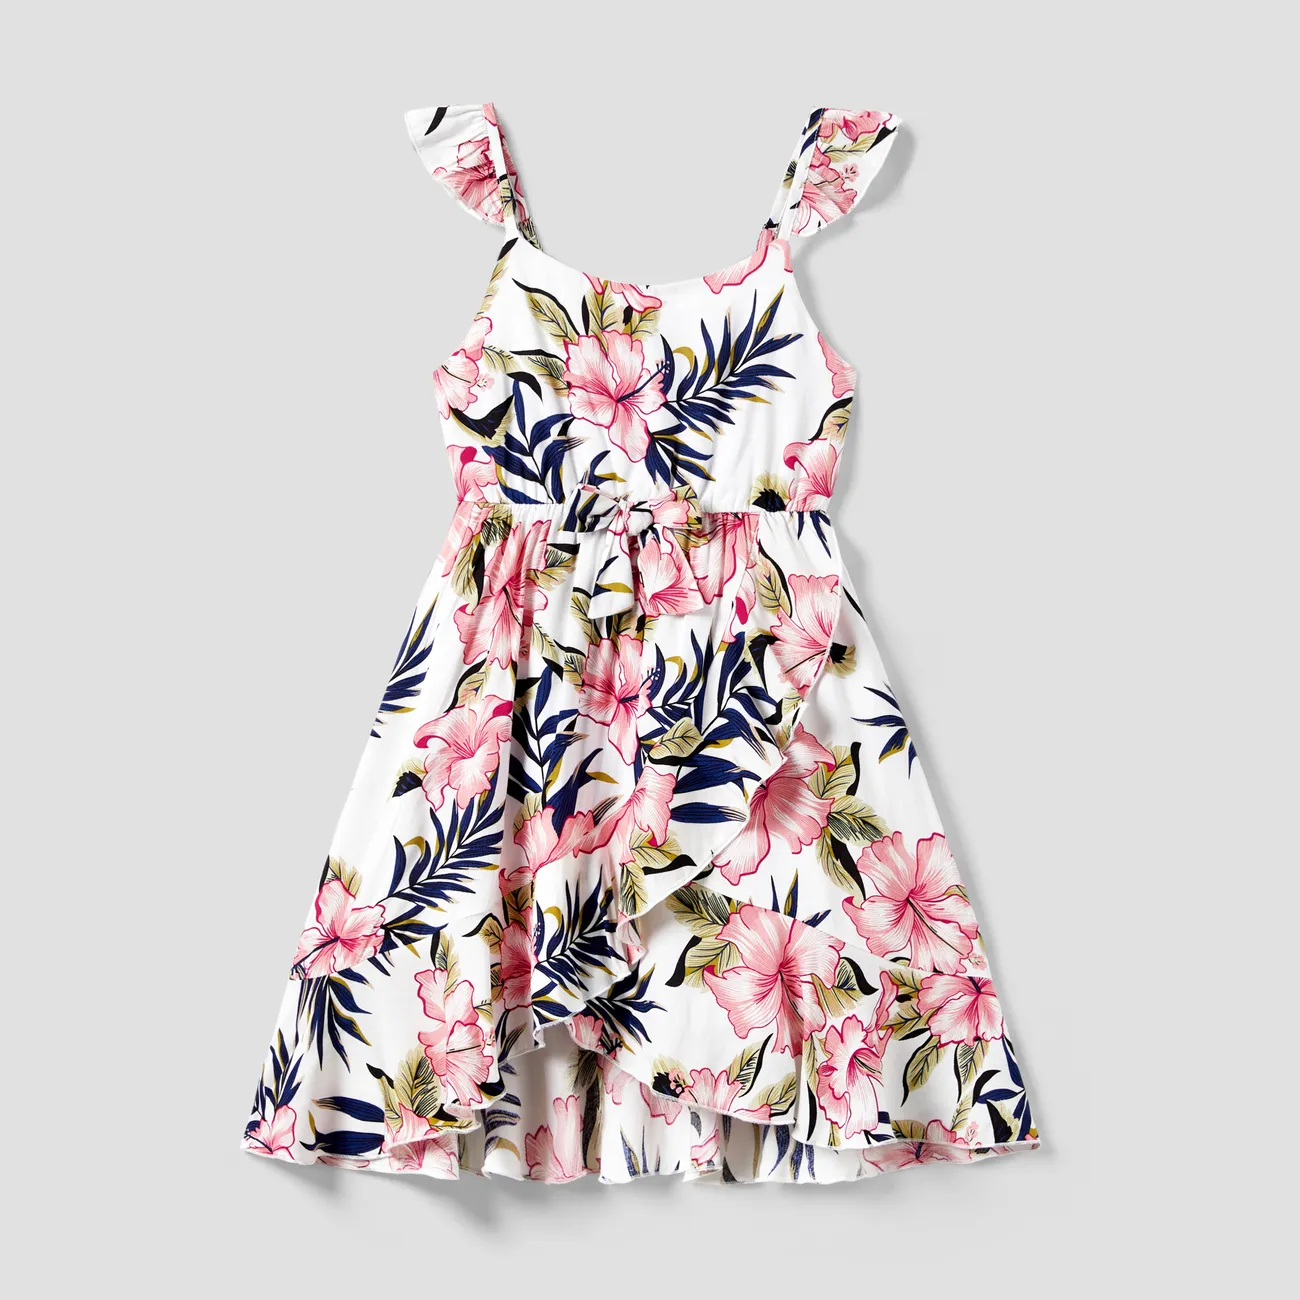 Family Matching Floral Wrap Bottom Strap Dress and Colorblock T-shirt Sets Pink big image 1